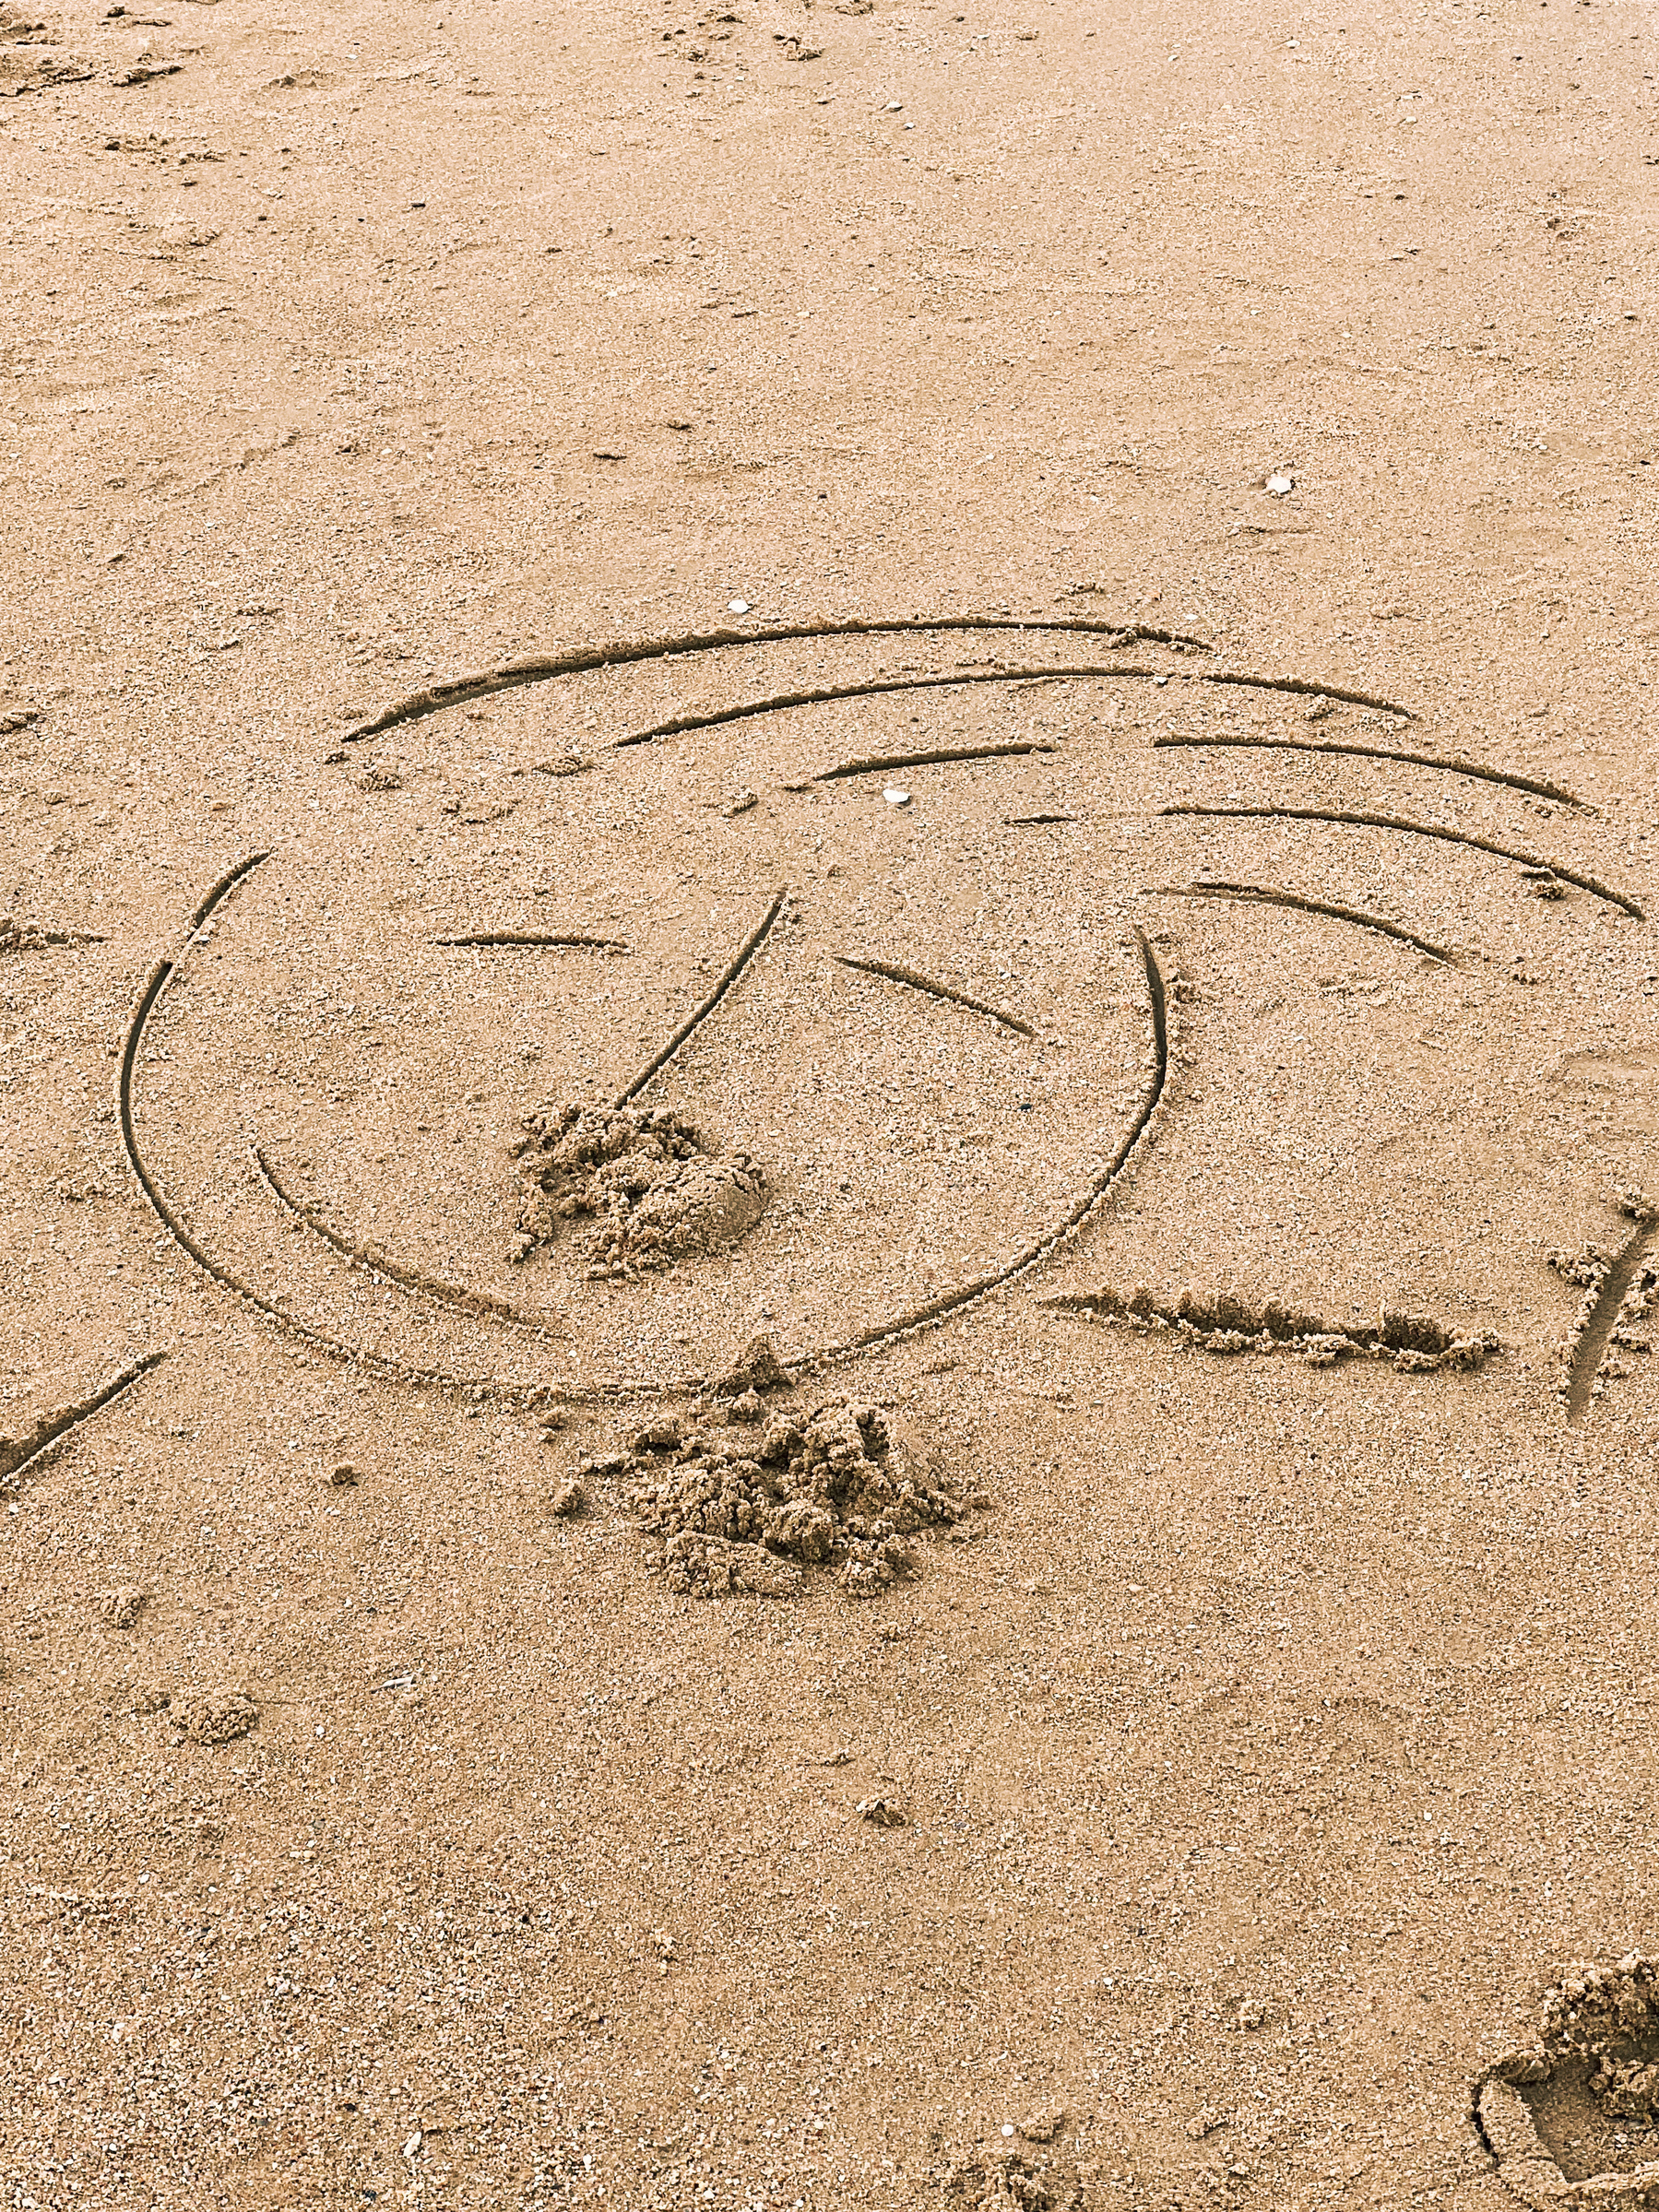 A face drawn in the sand. 